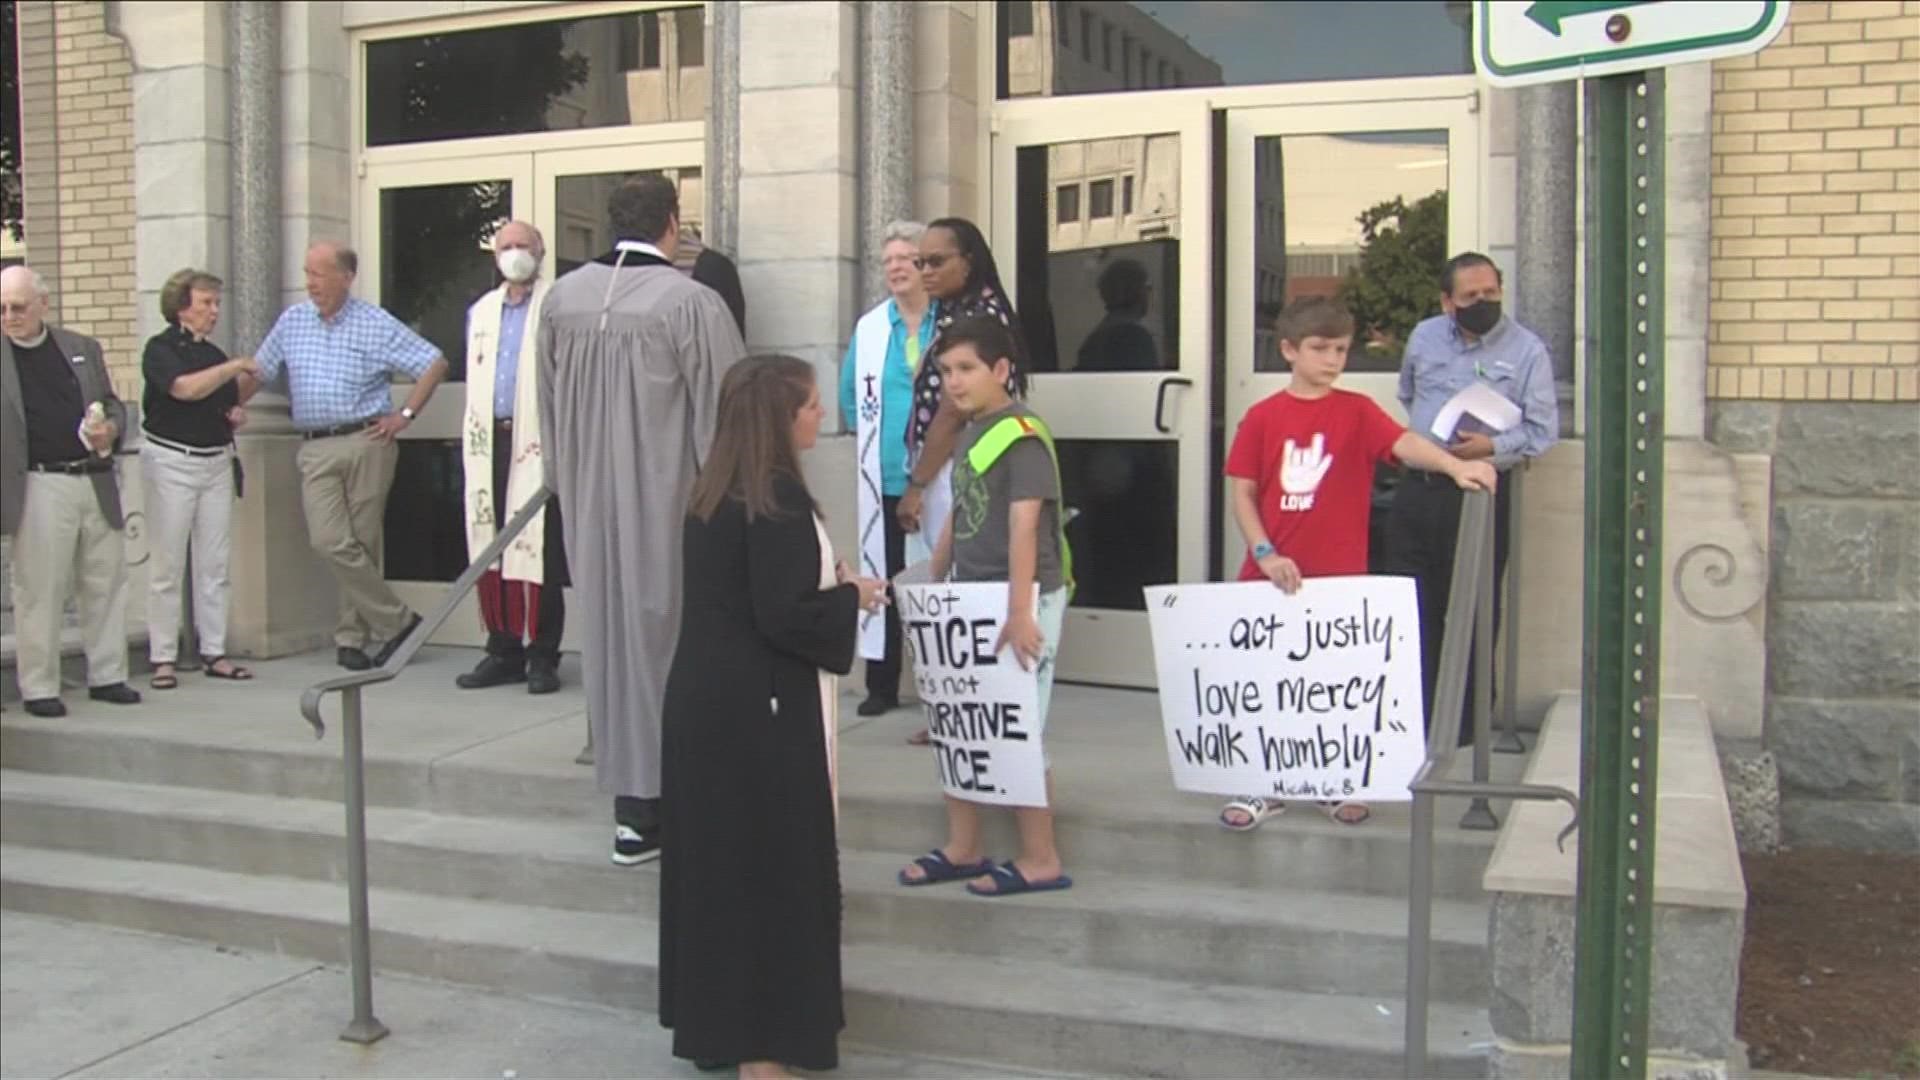 The clergy who spoke Tuesday said they wrote to Shelby County District Attorney General Amy Weirich about the issue.